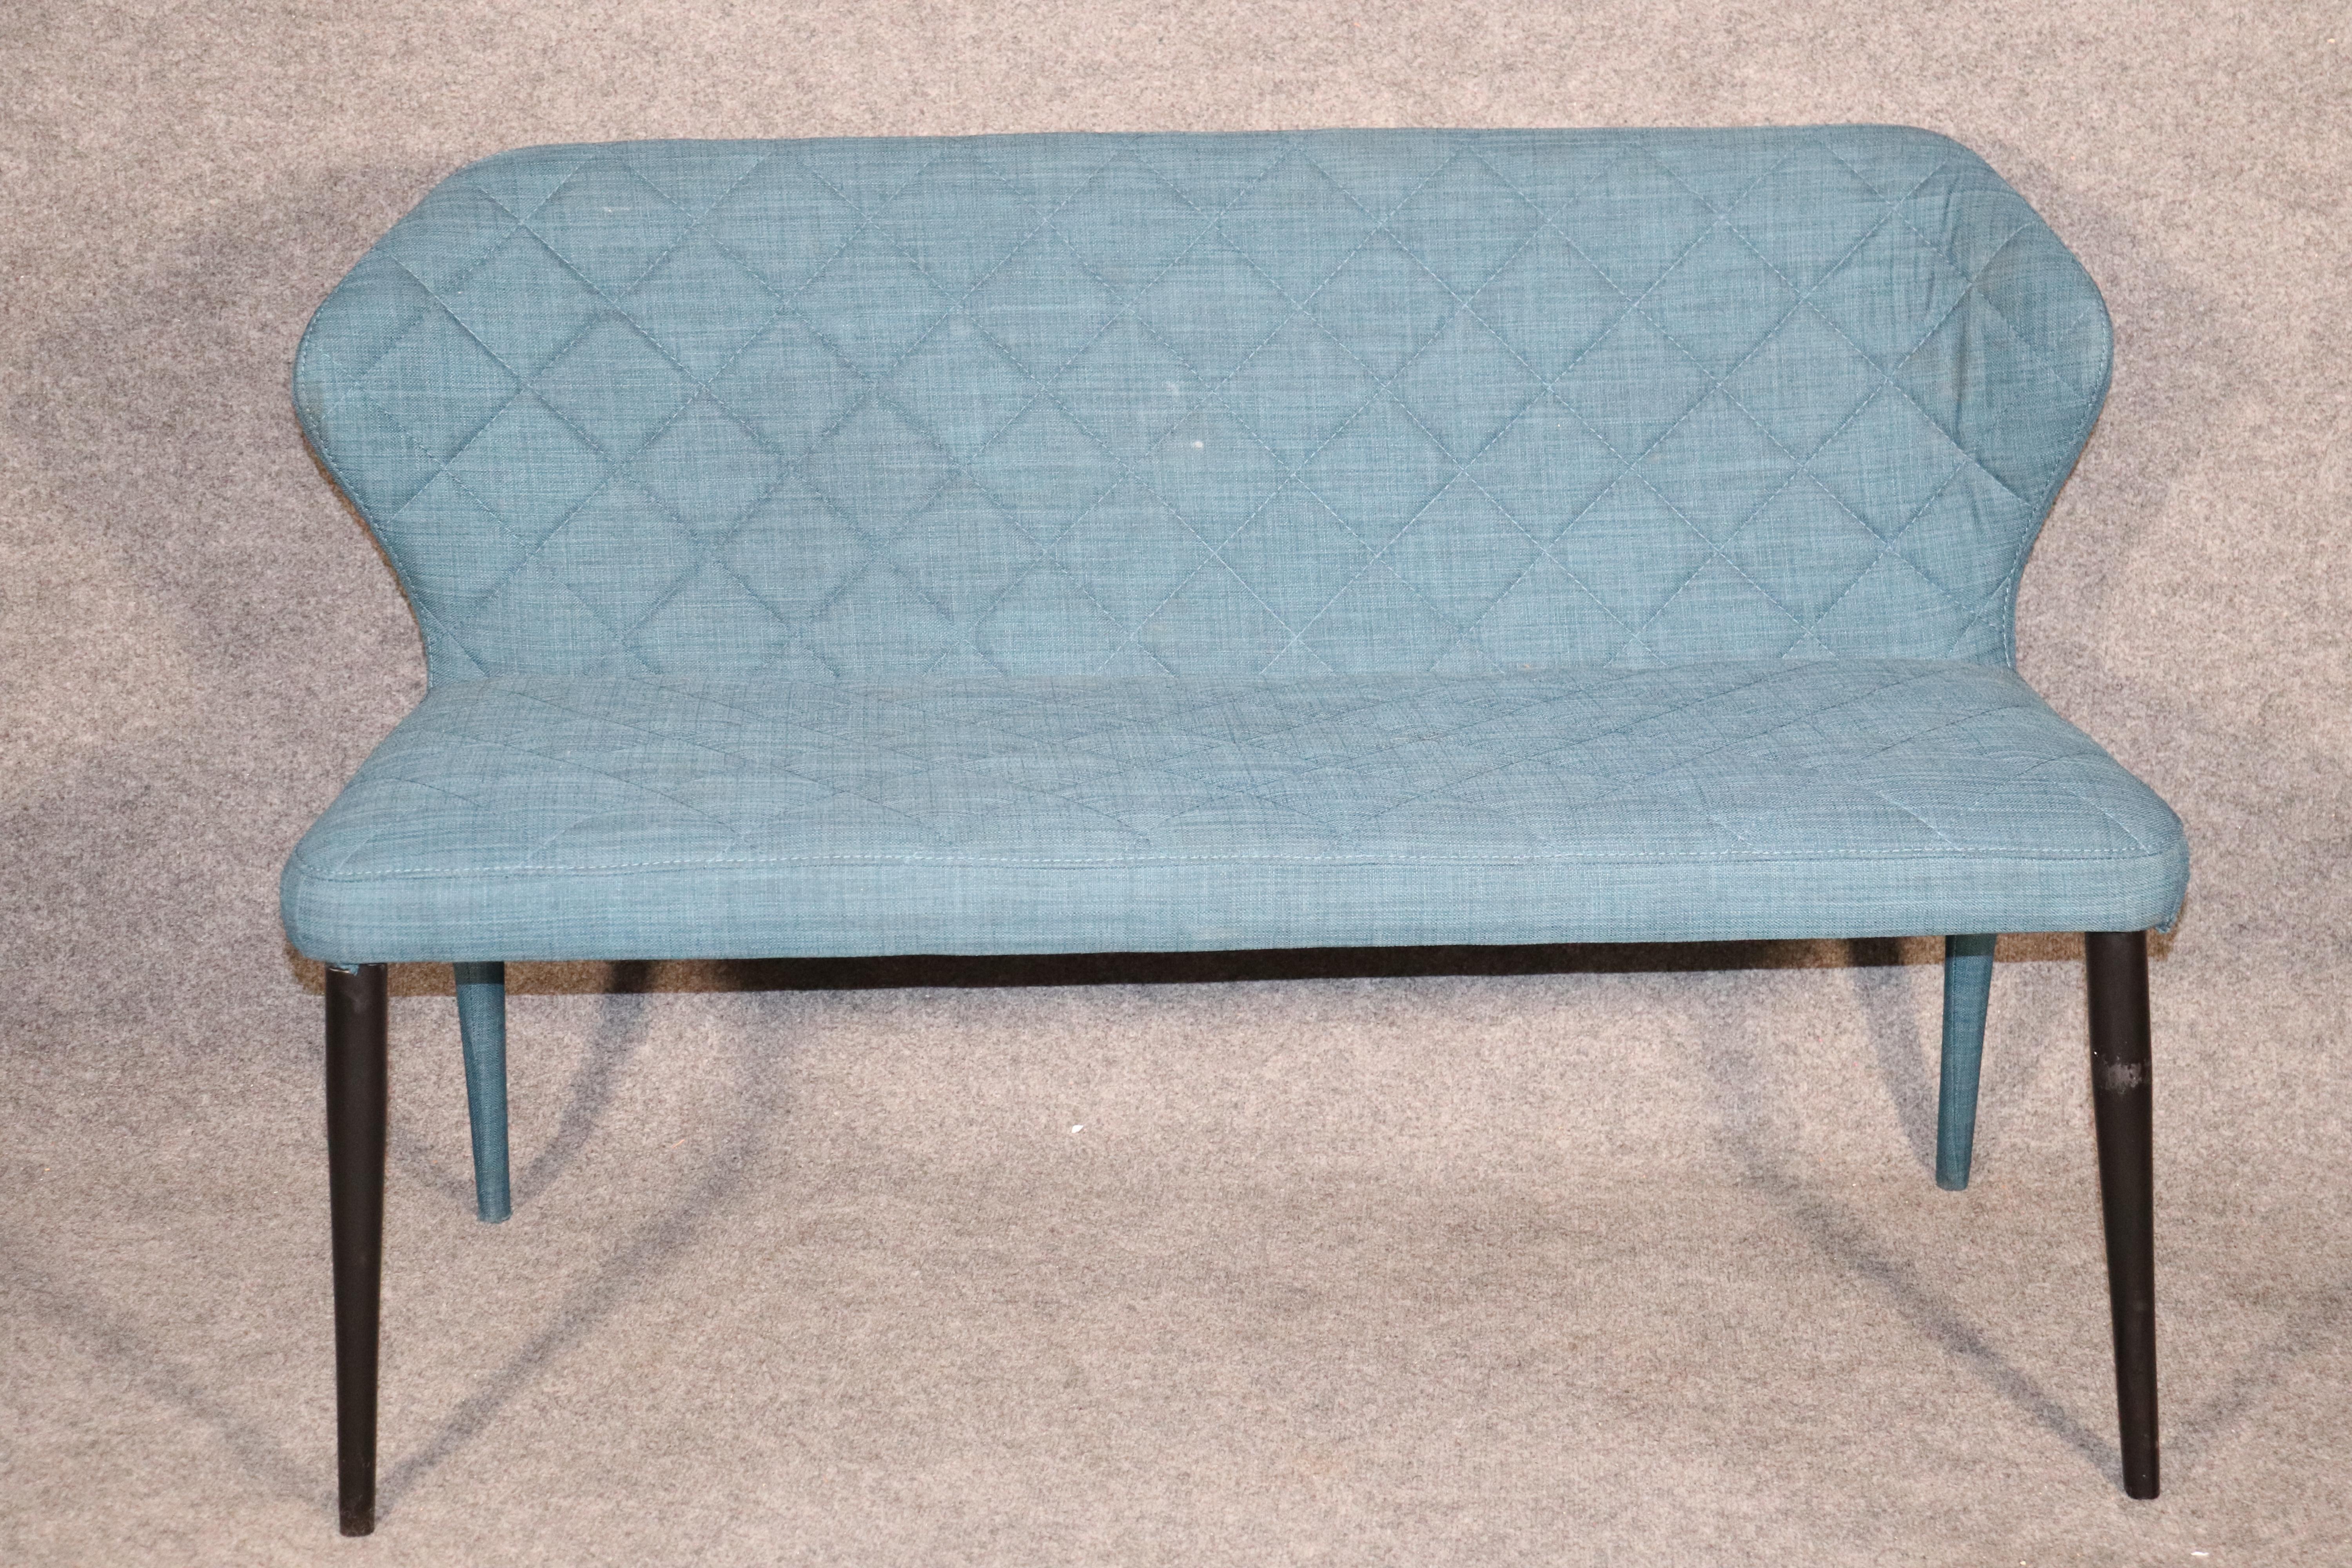 Petite loveseat with curved back and tapered legs. 
Please confirm location.